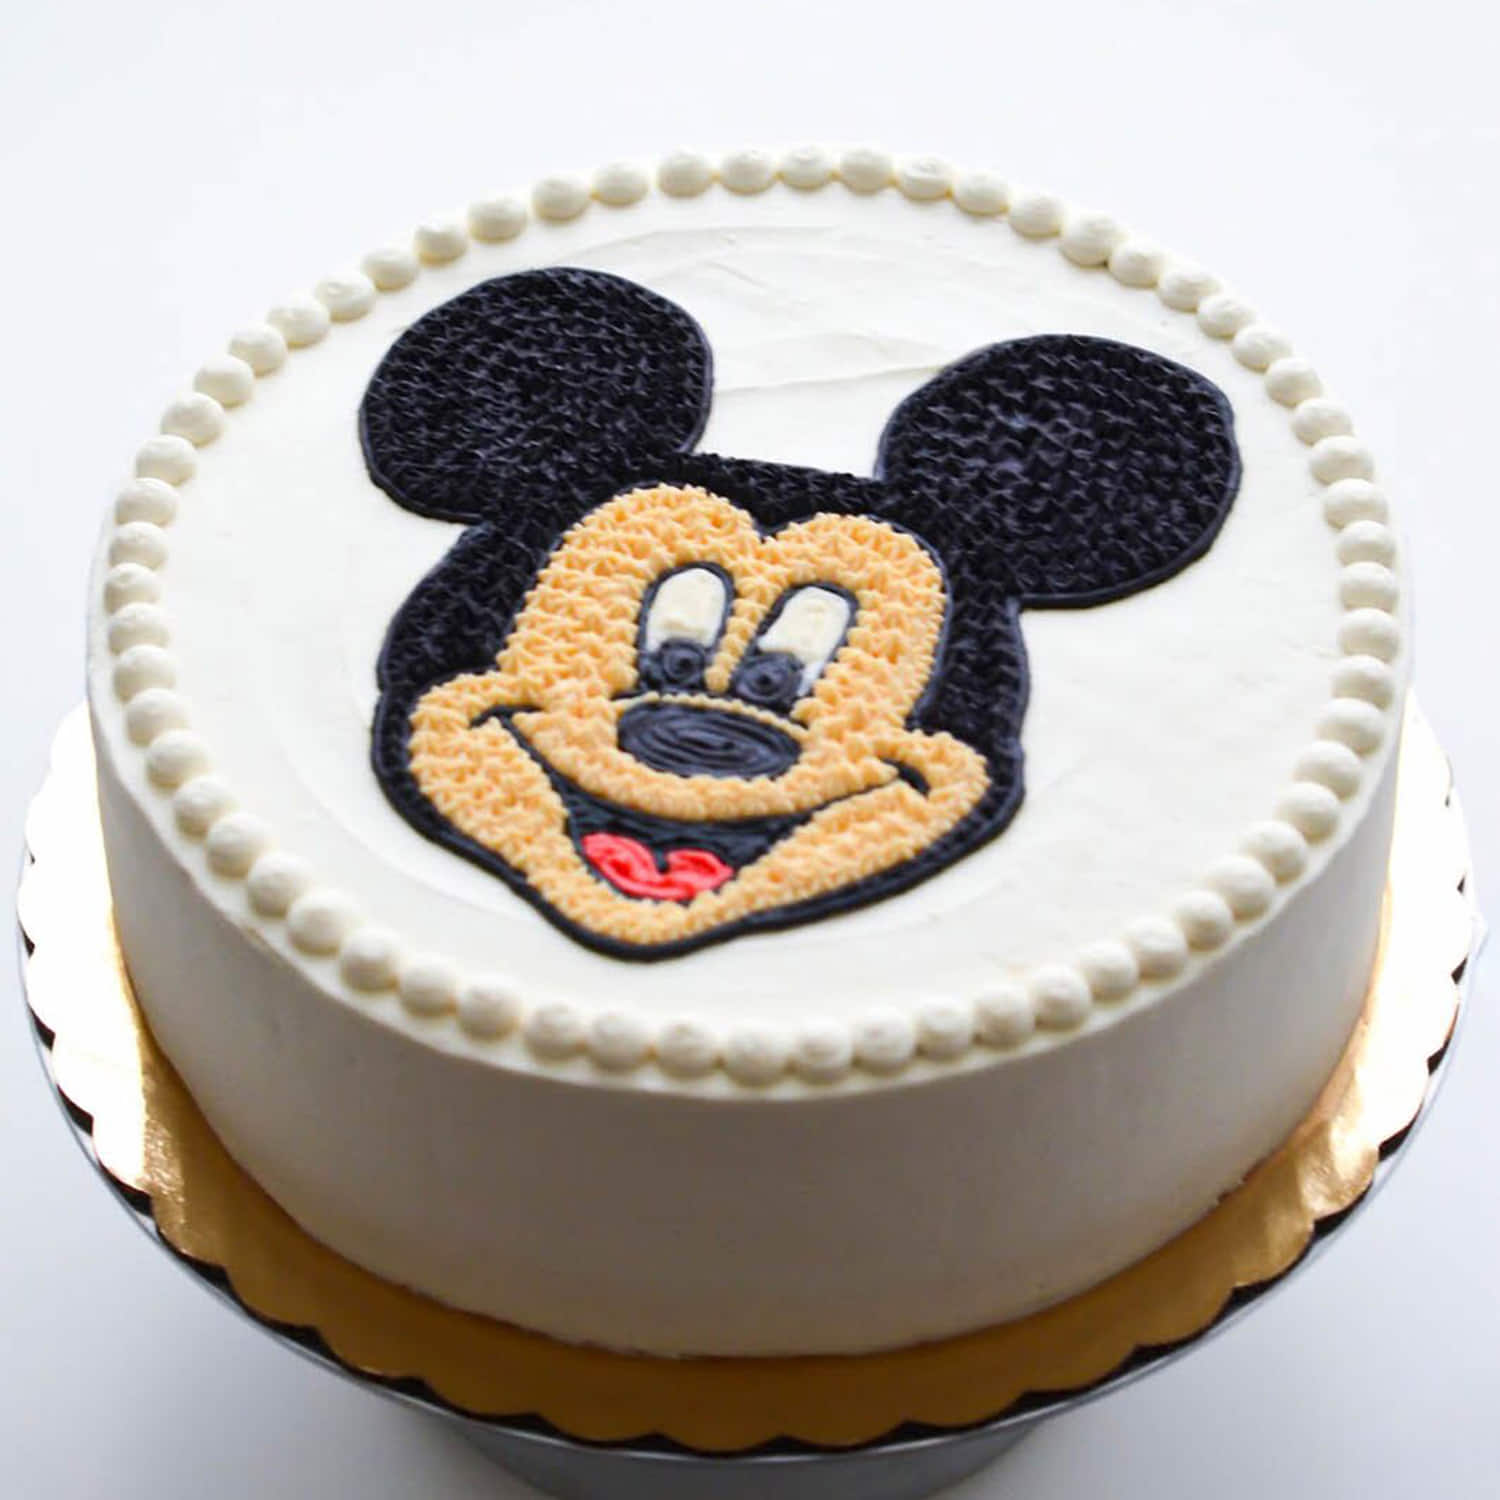 Mickey Mouse Cakedesign Given By Client - CakeCentral.com